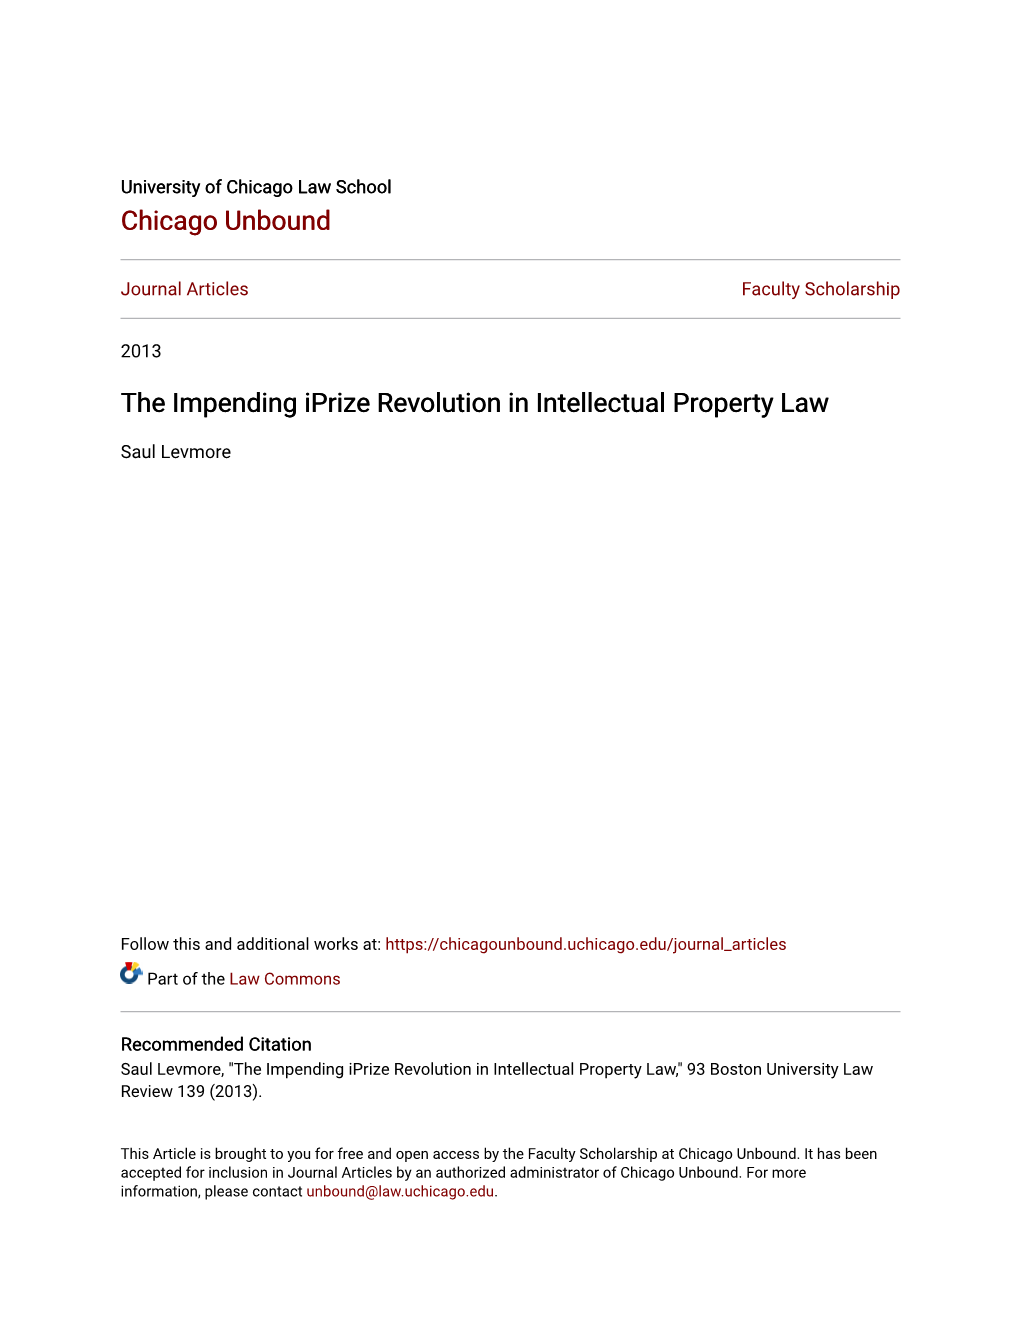 The Impending Iprize Revolution in Intellectual Property Law